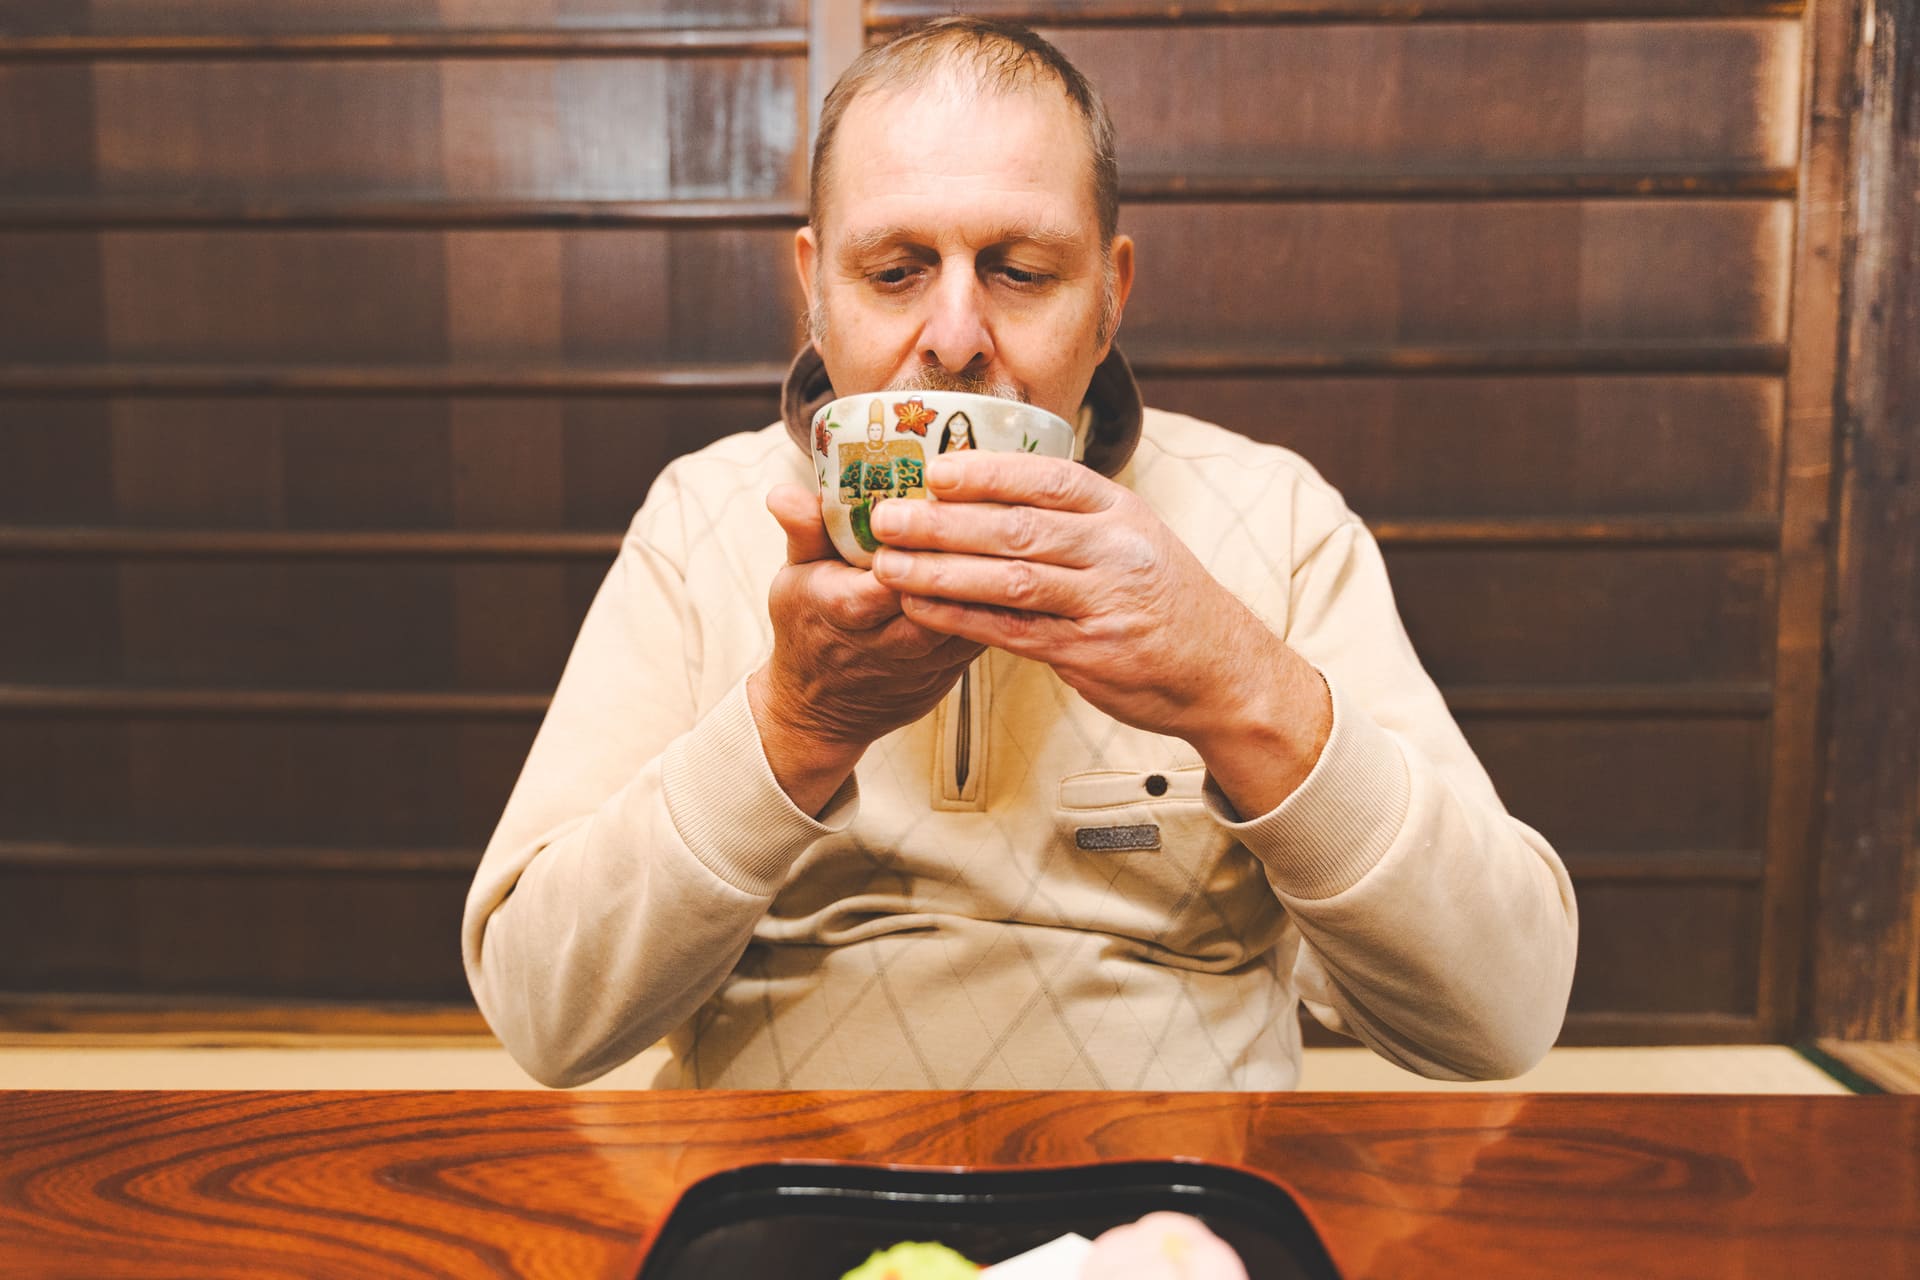 Japanese Cultural Experiences at Kyoto Abeya. A man wearing a sweater is having Japanese green tea with Japanese sweets in front of him.